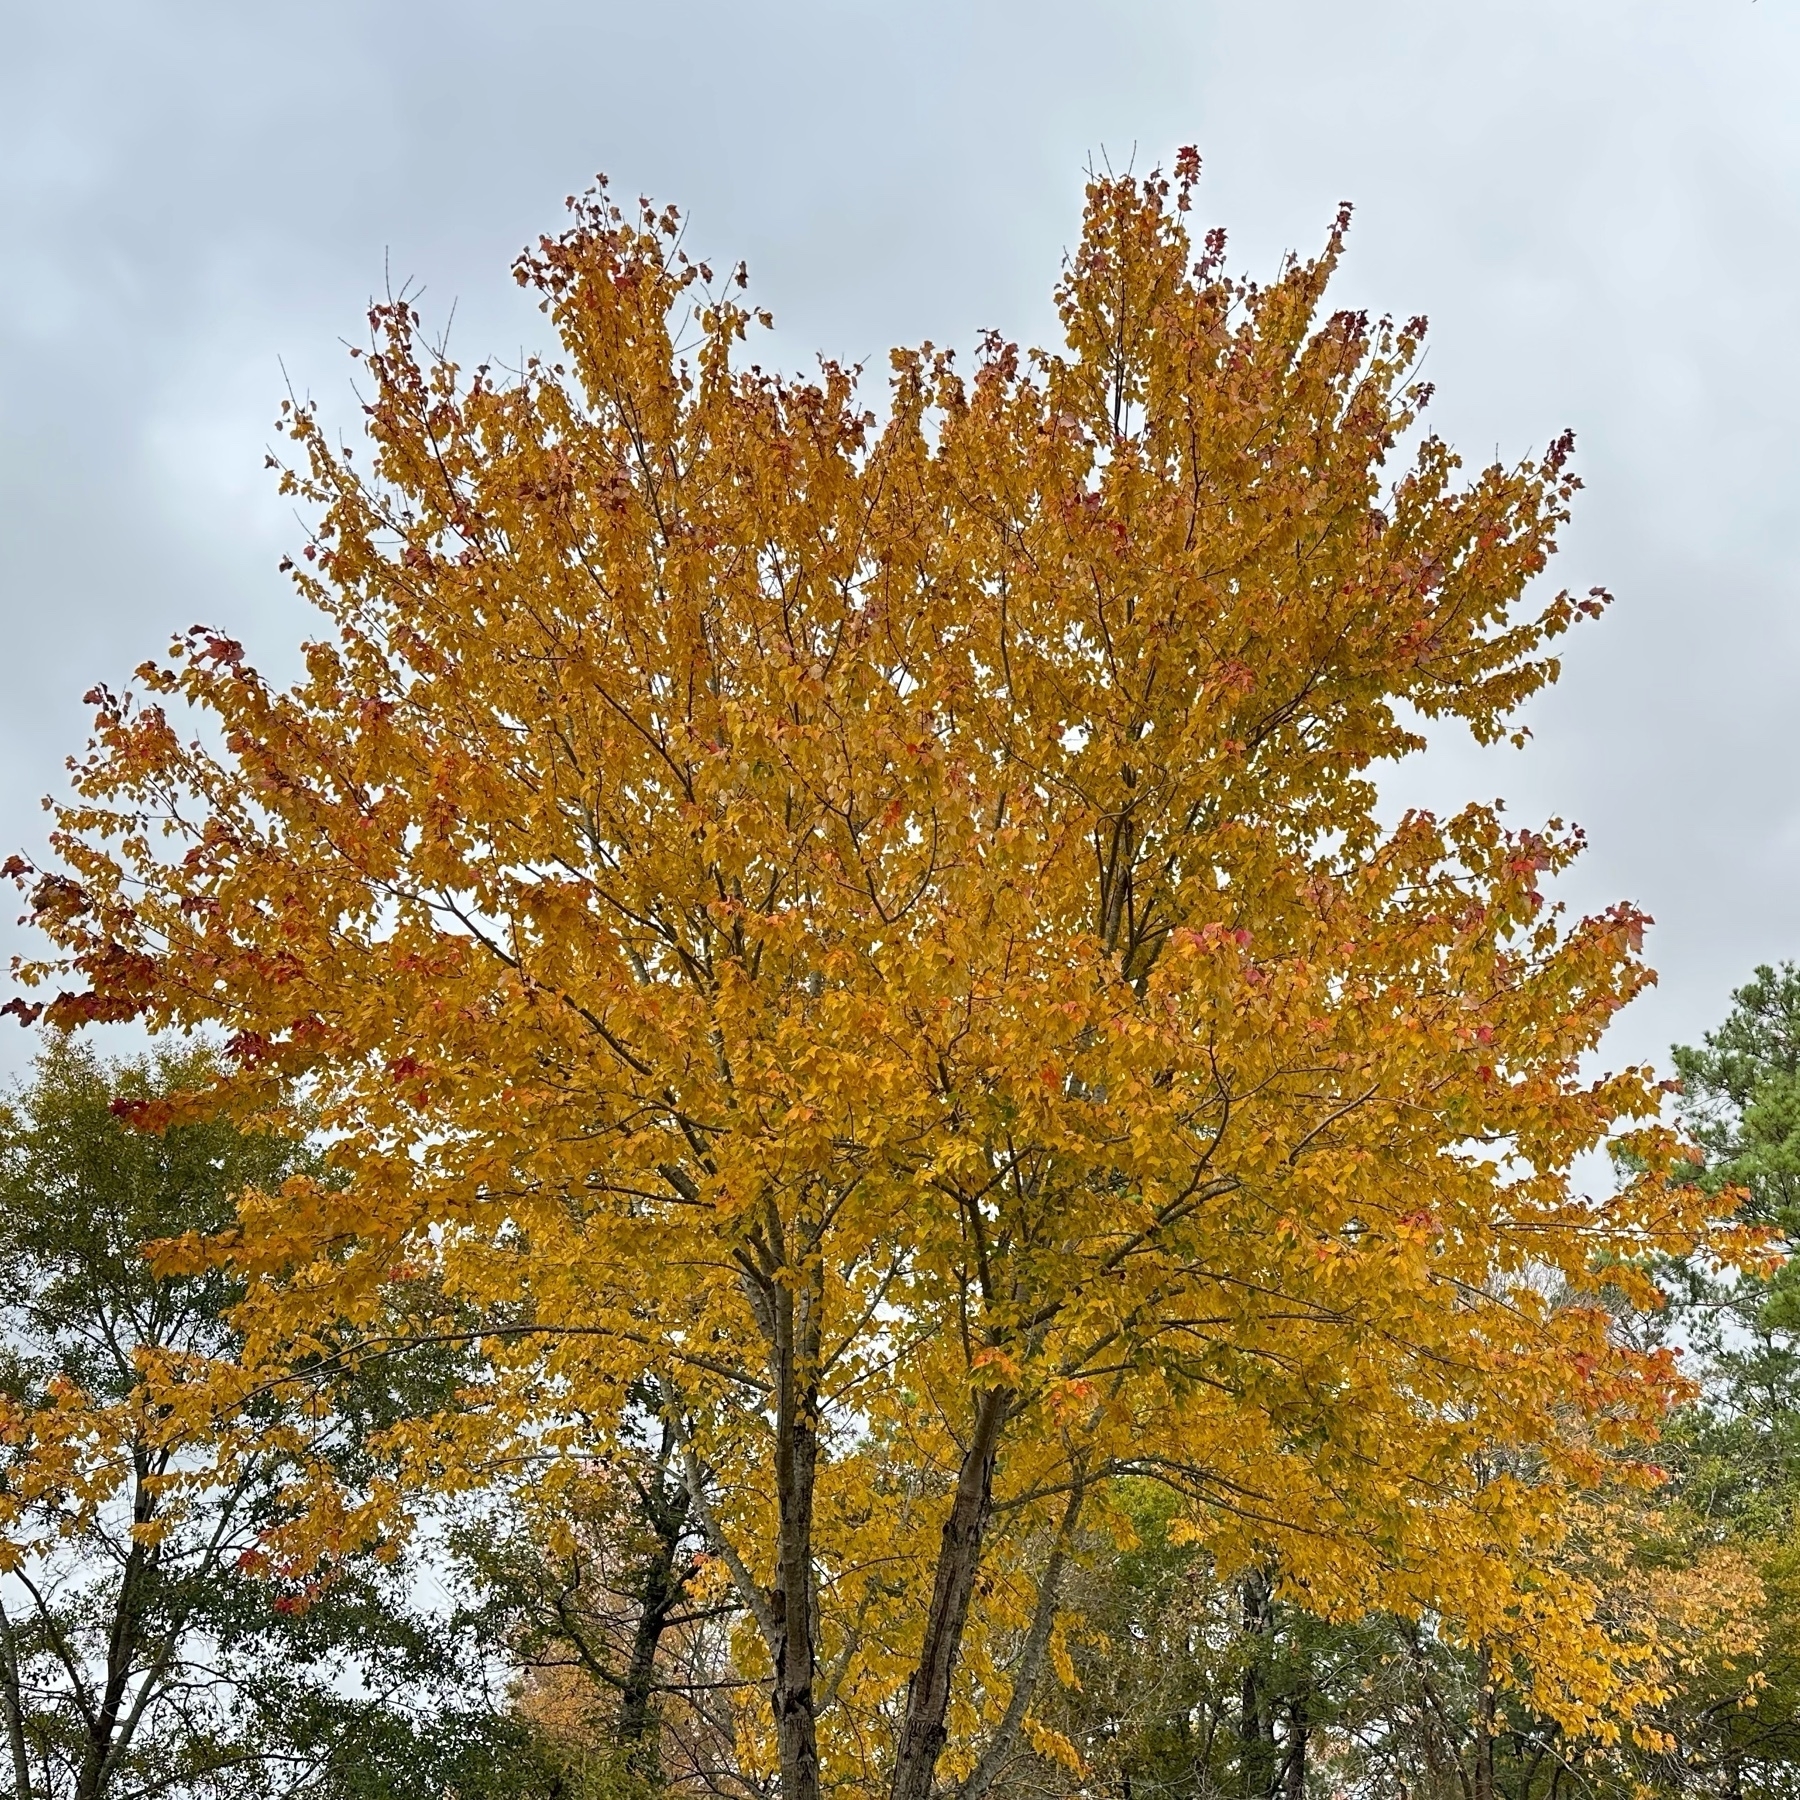 Leaves changing color to yellow